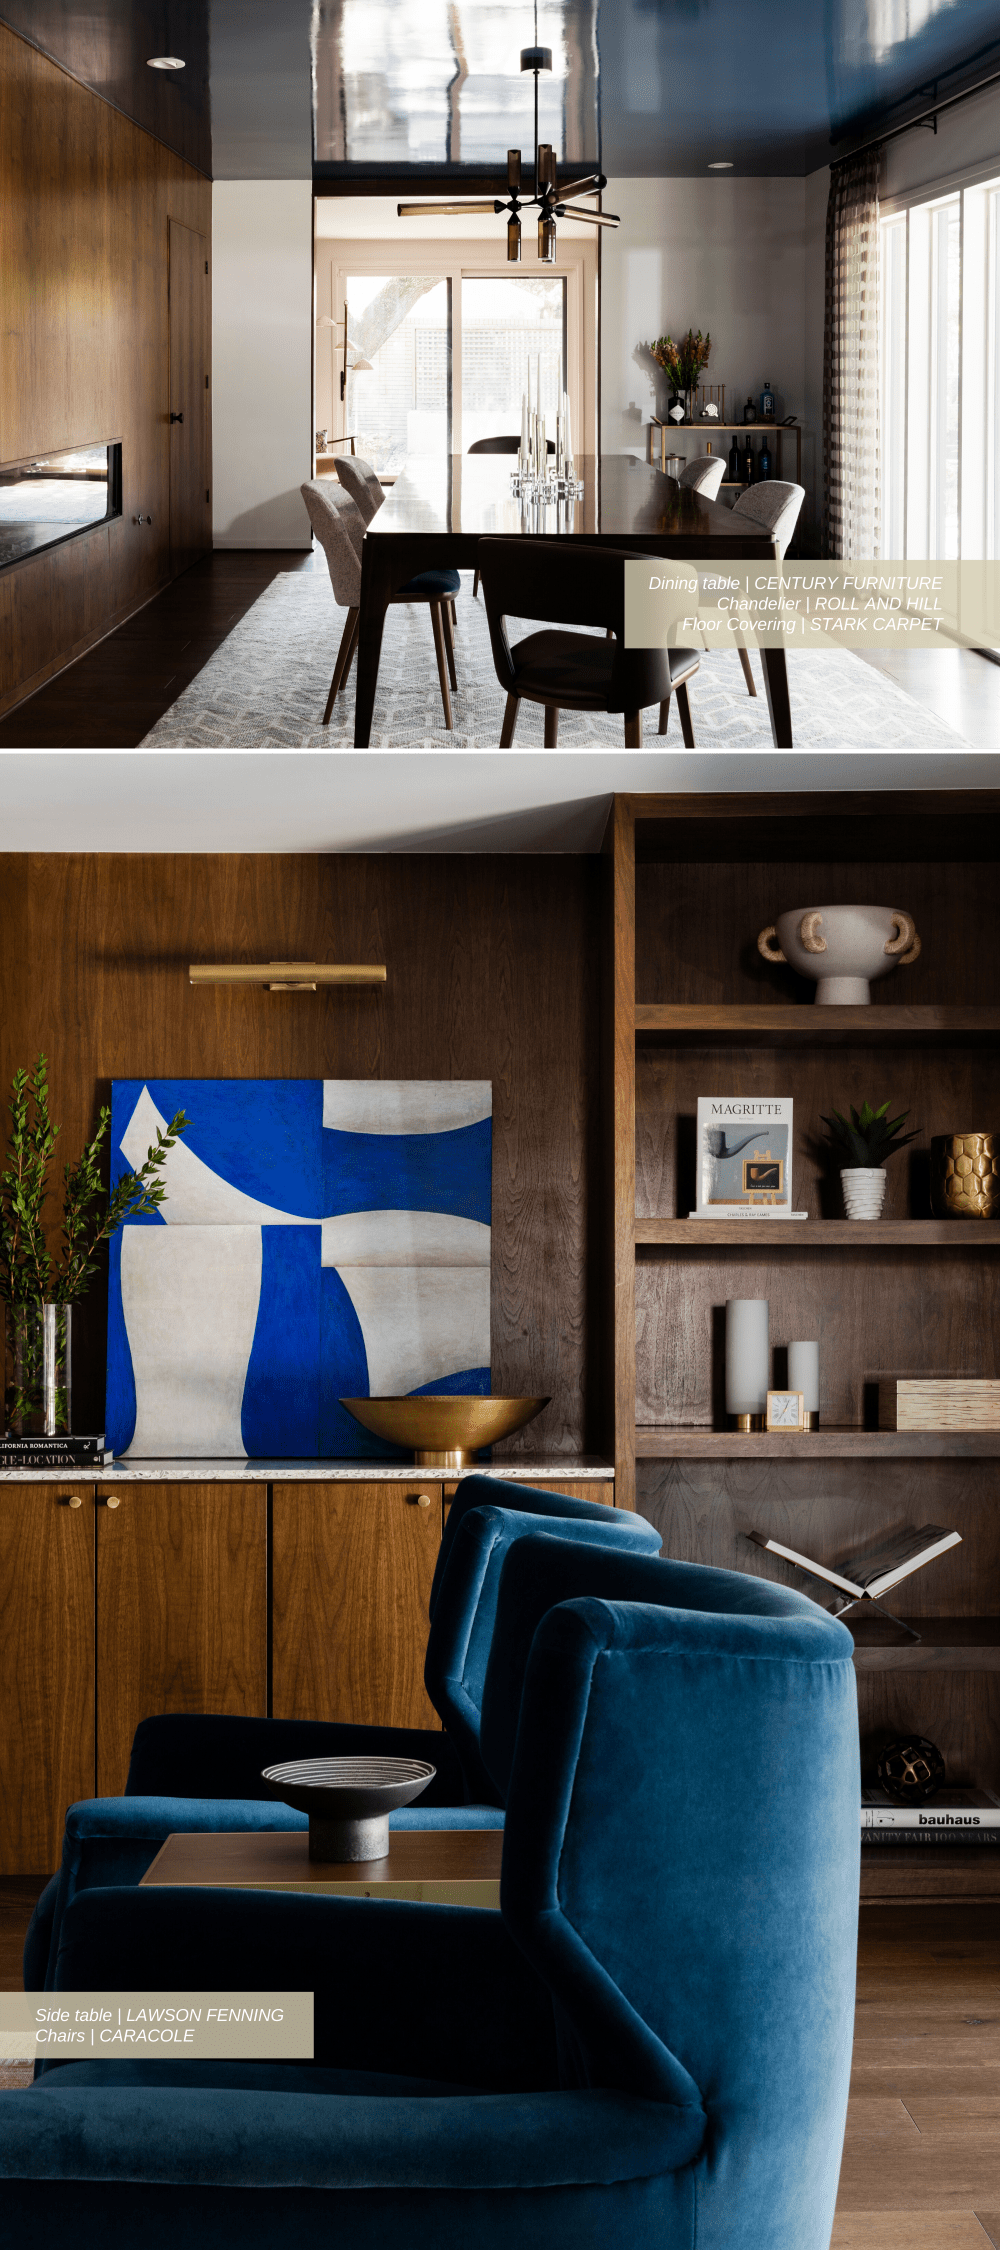 A mid-century home with dark woodwork and blue lacquered ceiling in dining room